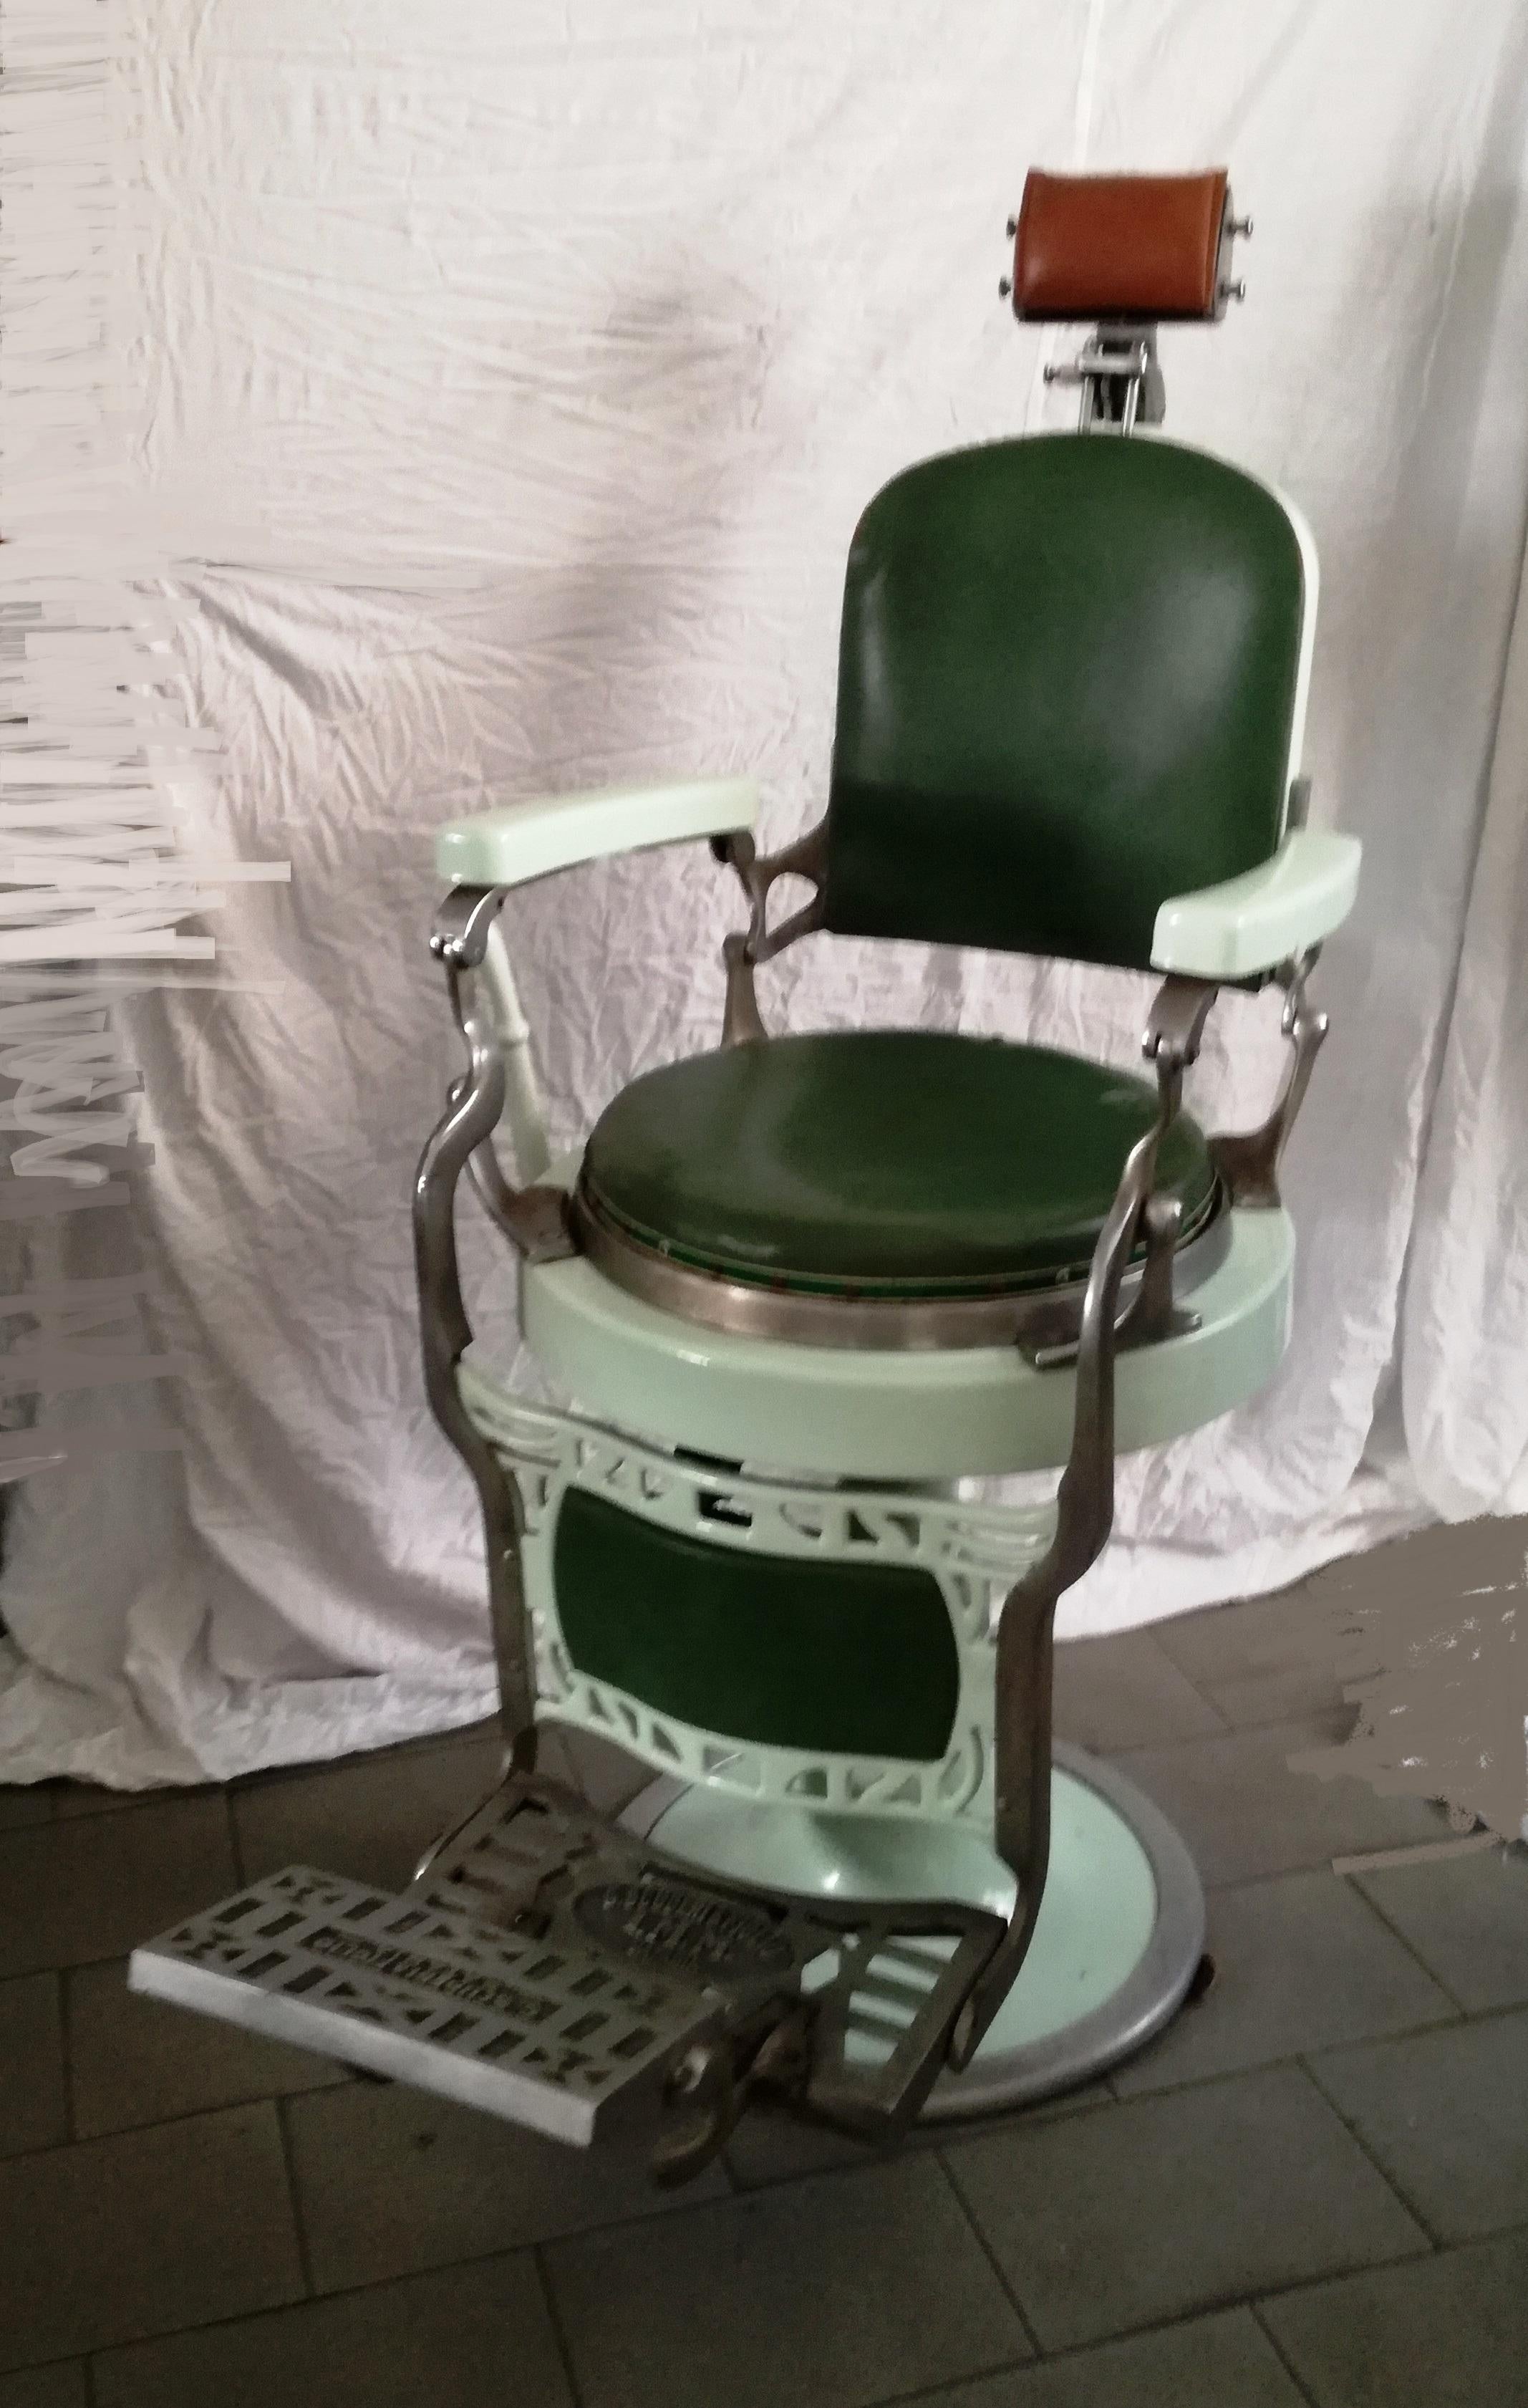 barber armchair, Sicilian. 1930s/40s all original. aluminum frame, skai upholstery, ceramic base and arms. manufacturer G.Scuderi. I.M.M Catania. Sicily functioning and reclining.